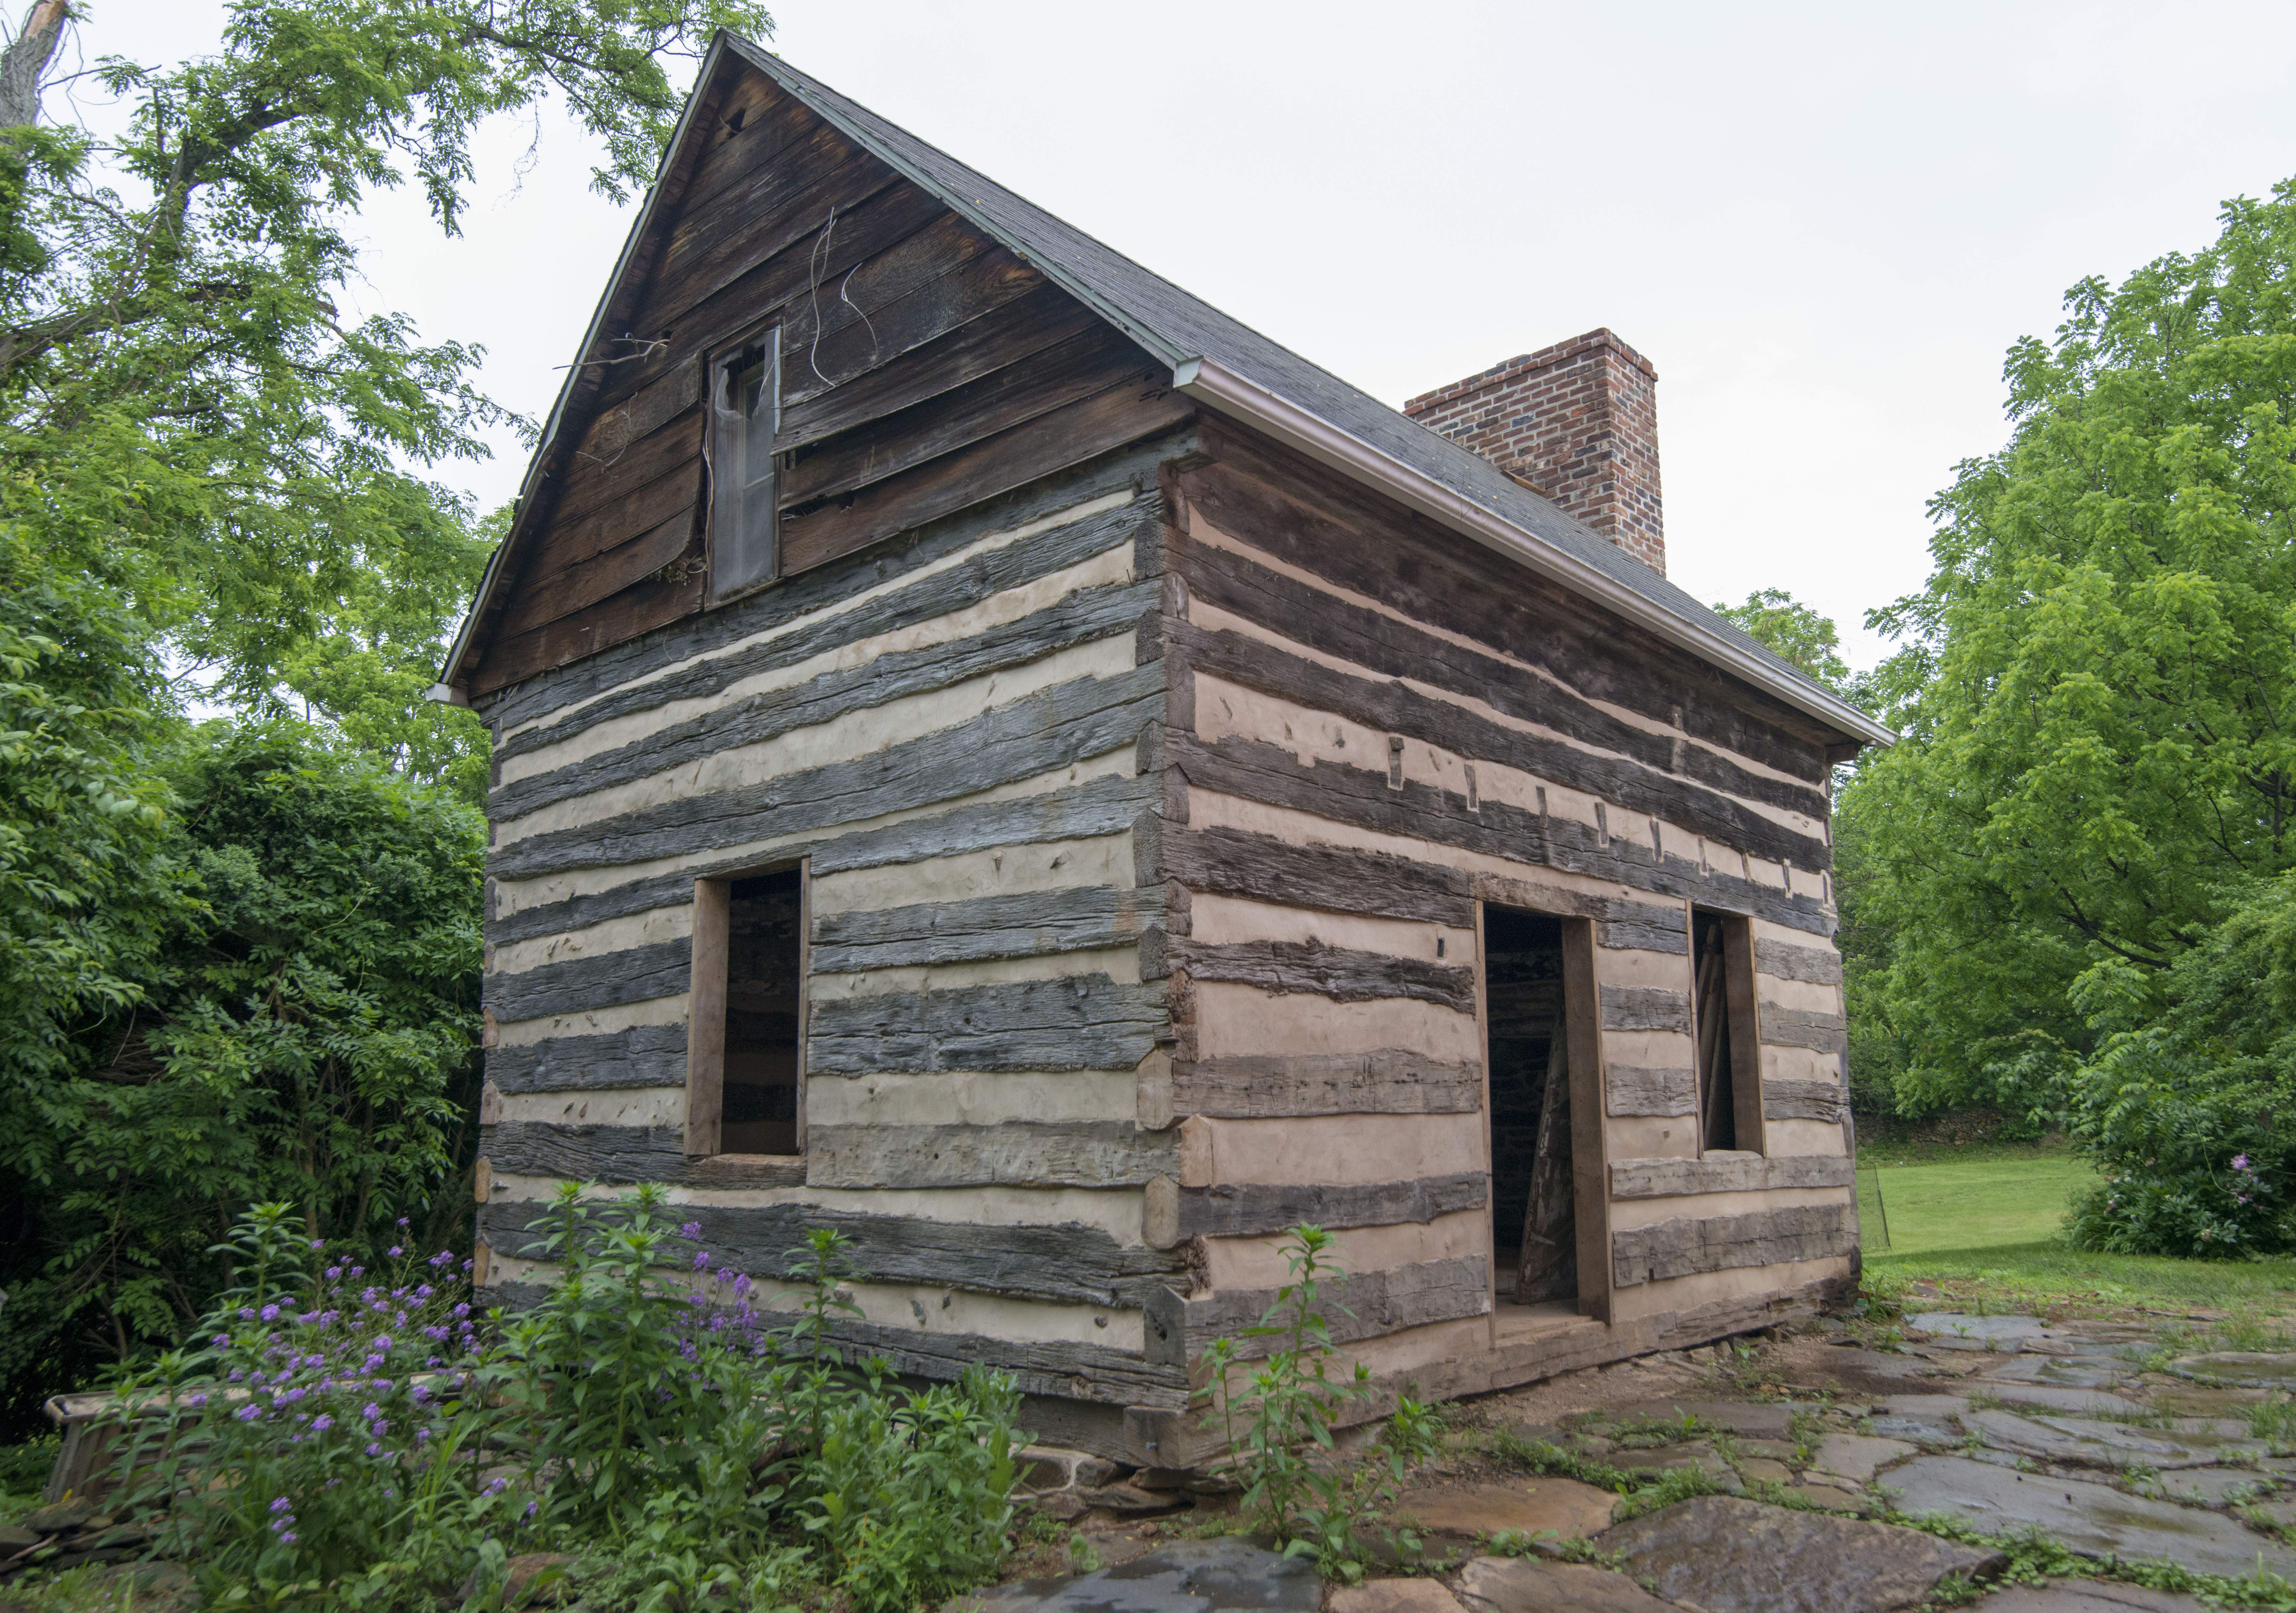 The Slave Dwelling Project Comes to Fauquier